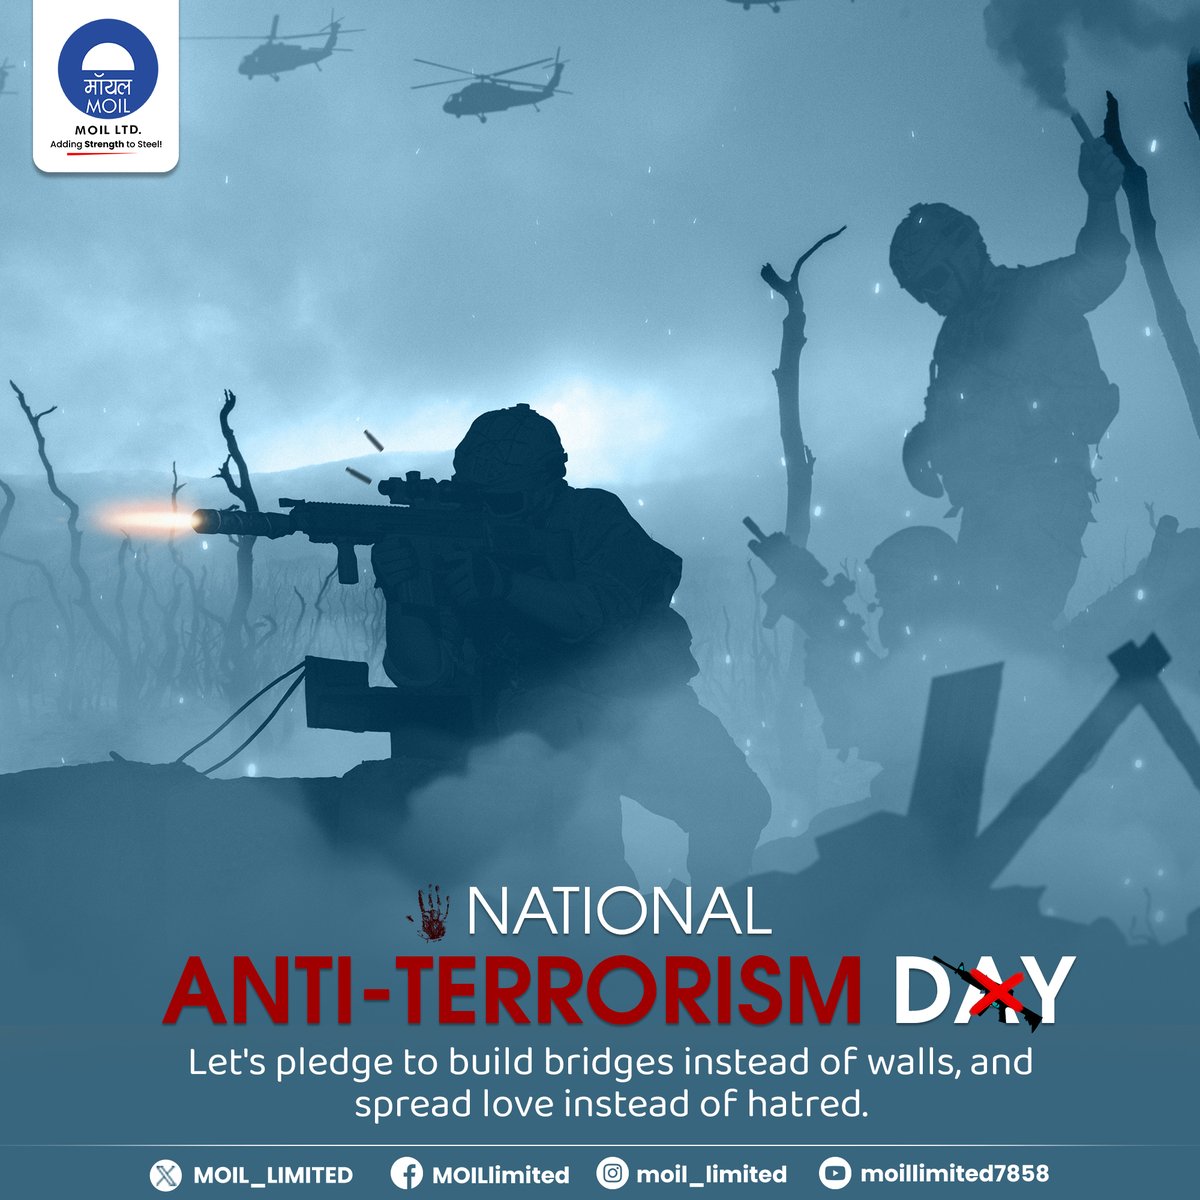 Uniting against terror, promoting peace. Today, we reaffirm our commitment to peace and harmony. #AntiTerrorismDay #PeaceOverHate #MOIL #HarEkKaamDeshKeNaam